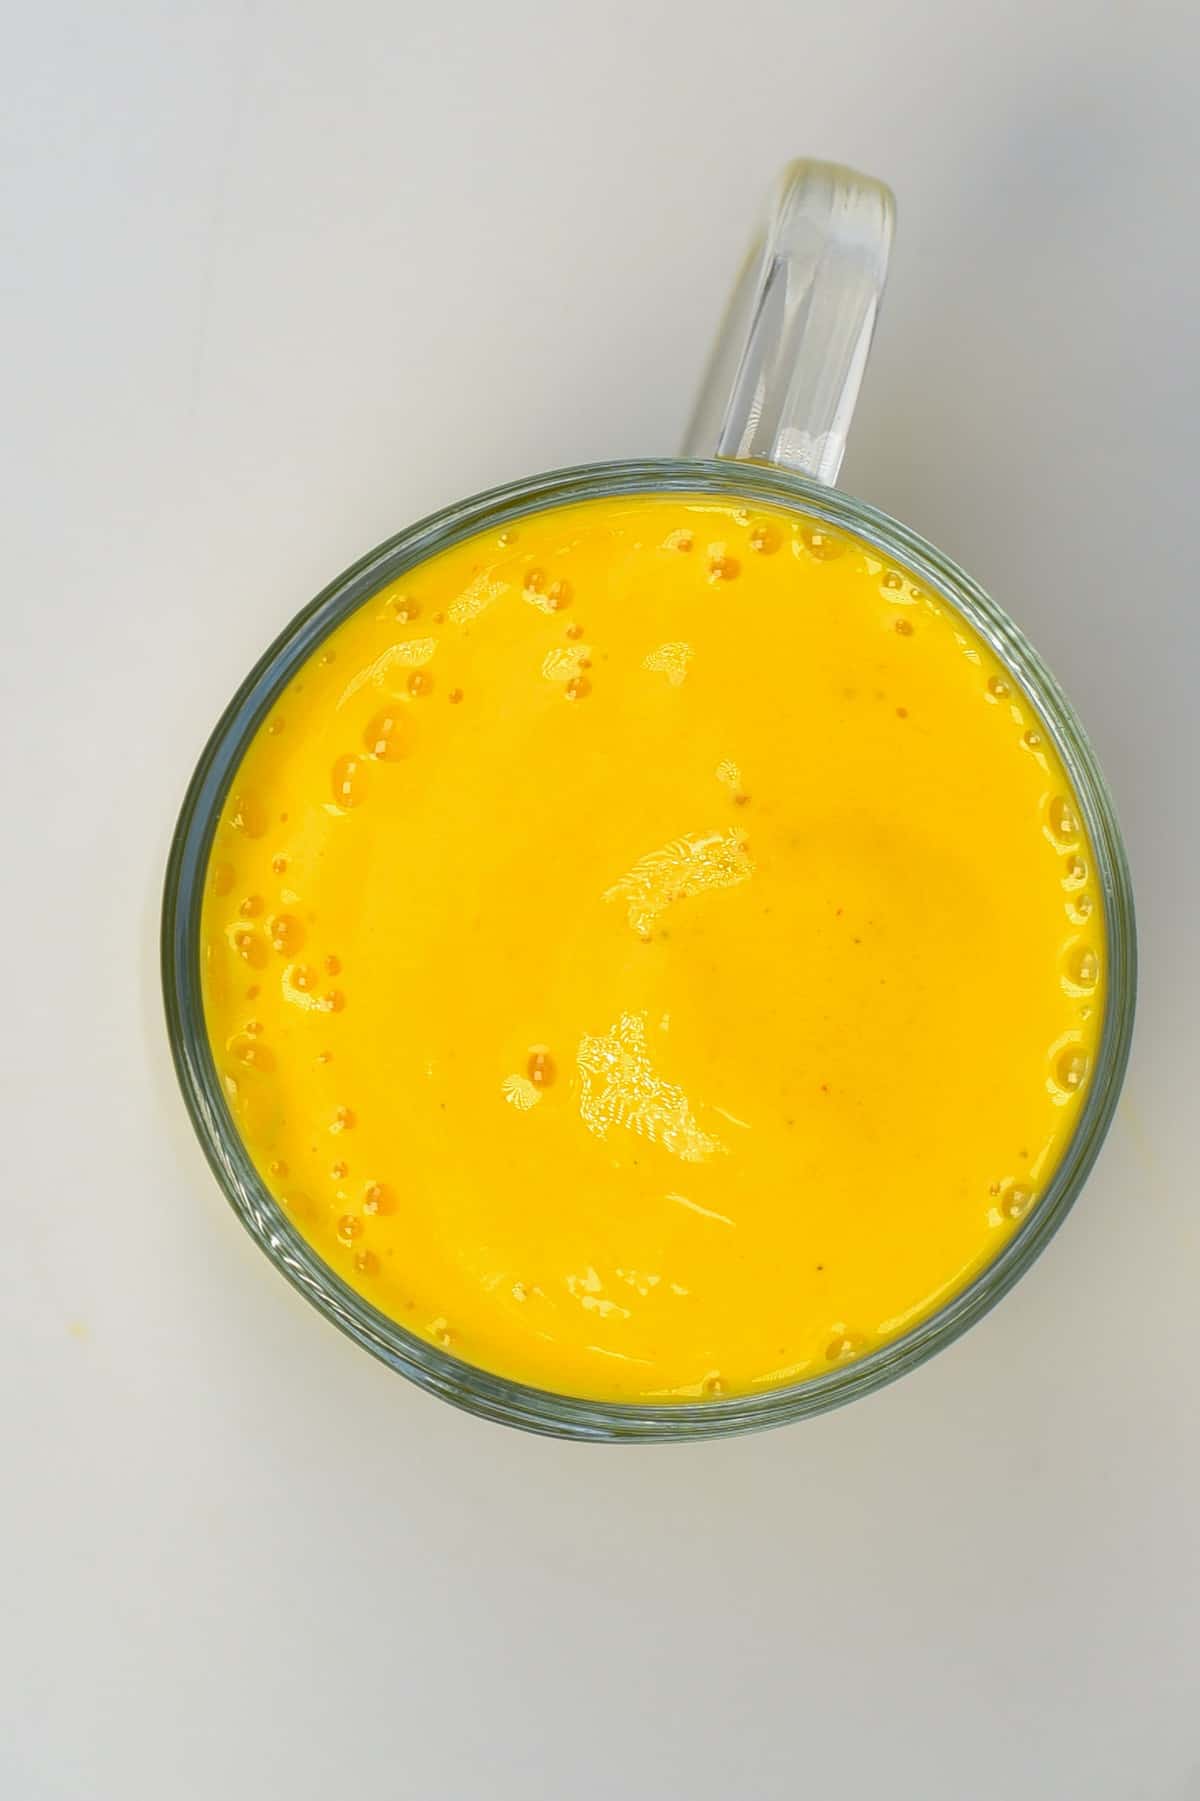 A cup with mango lassi